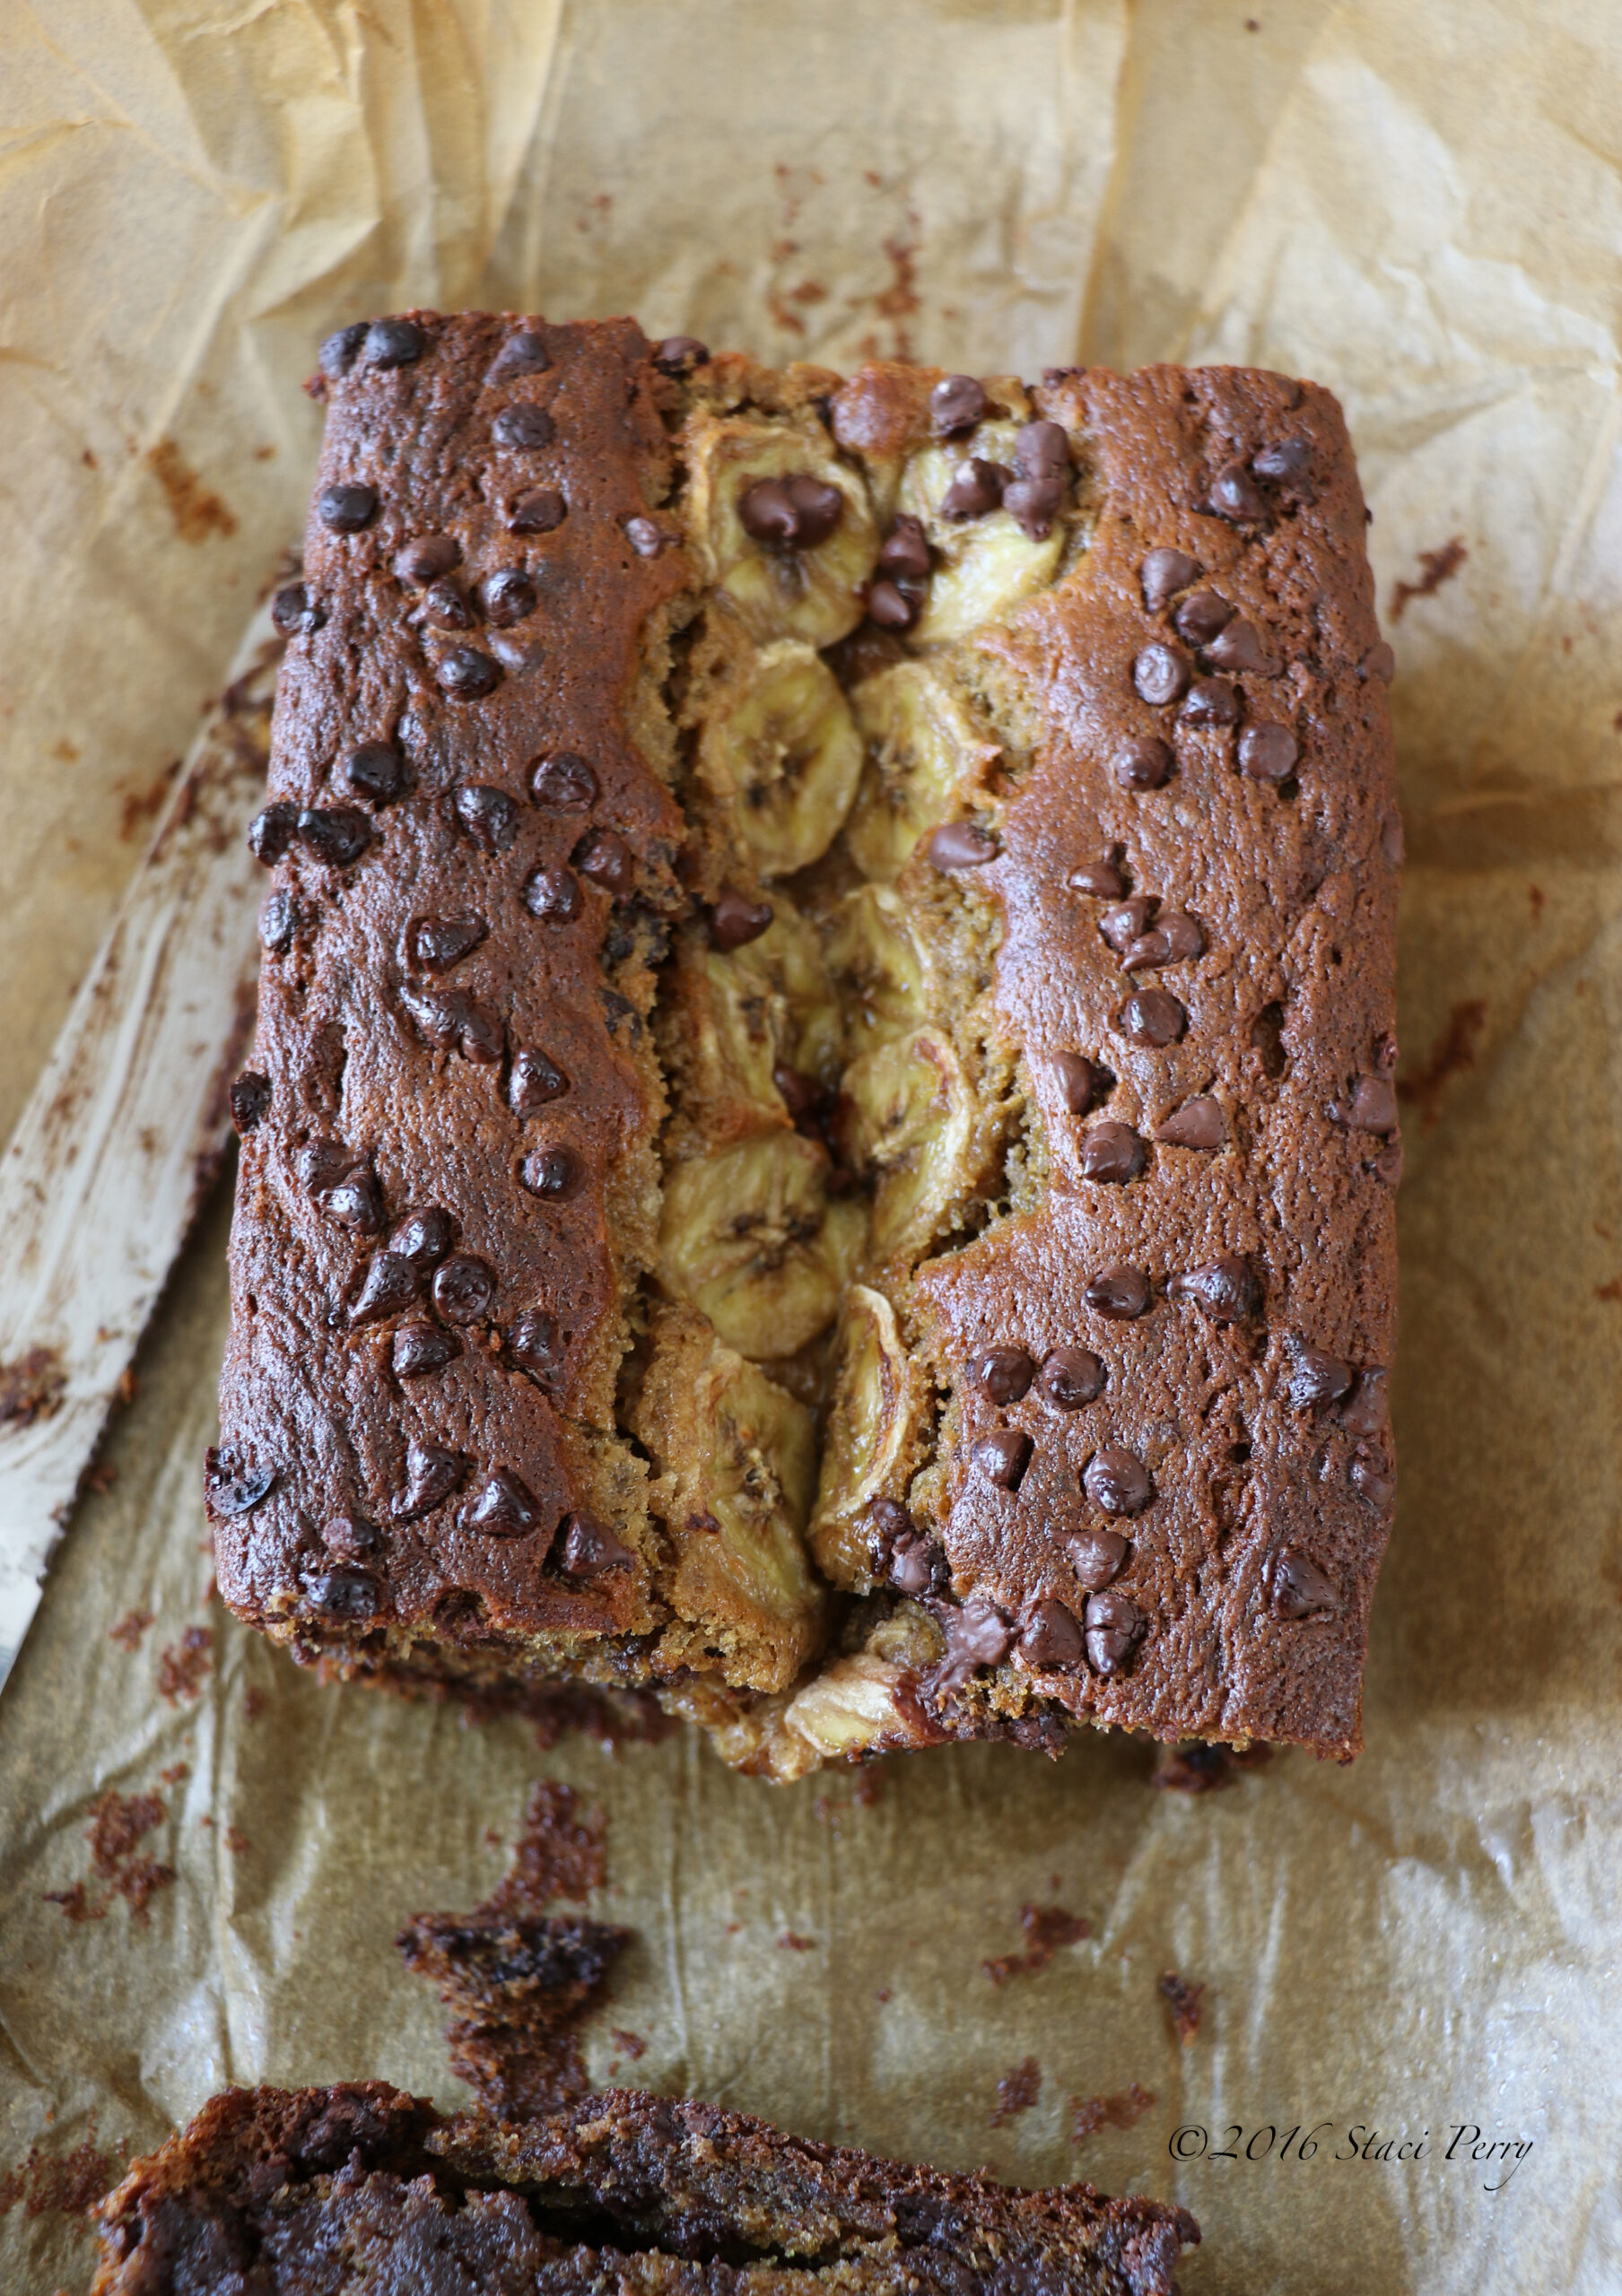 How to Make a Chocolate Chip Banana Bread Sinkhole